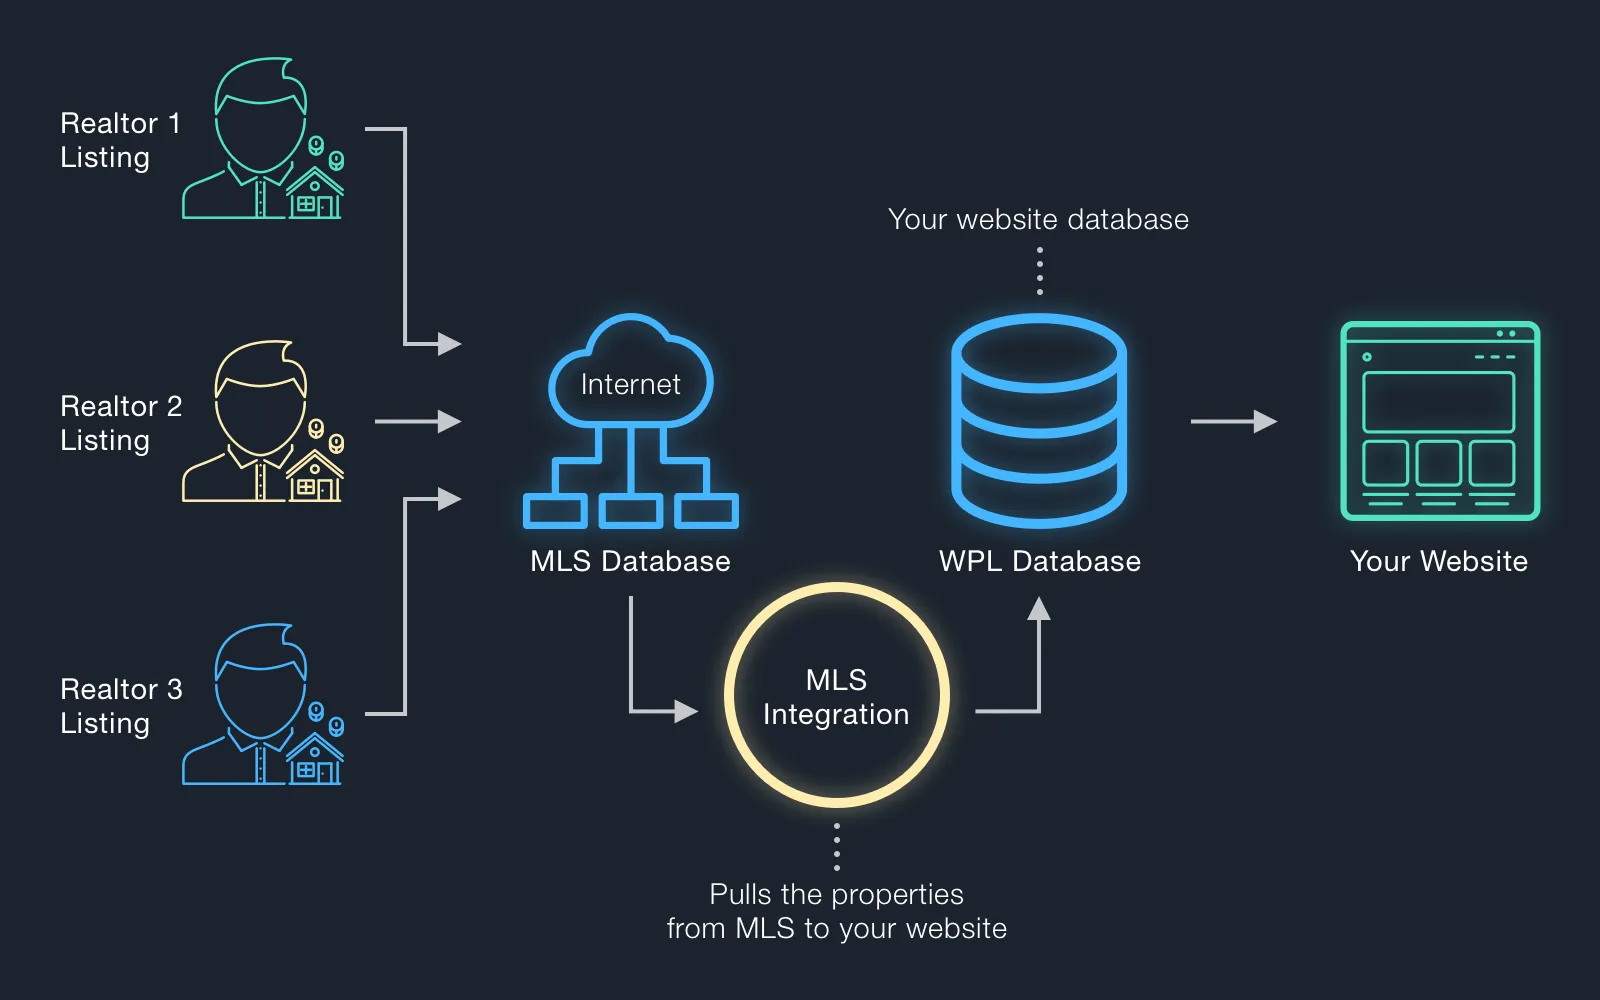 How MLS integration works without API realty